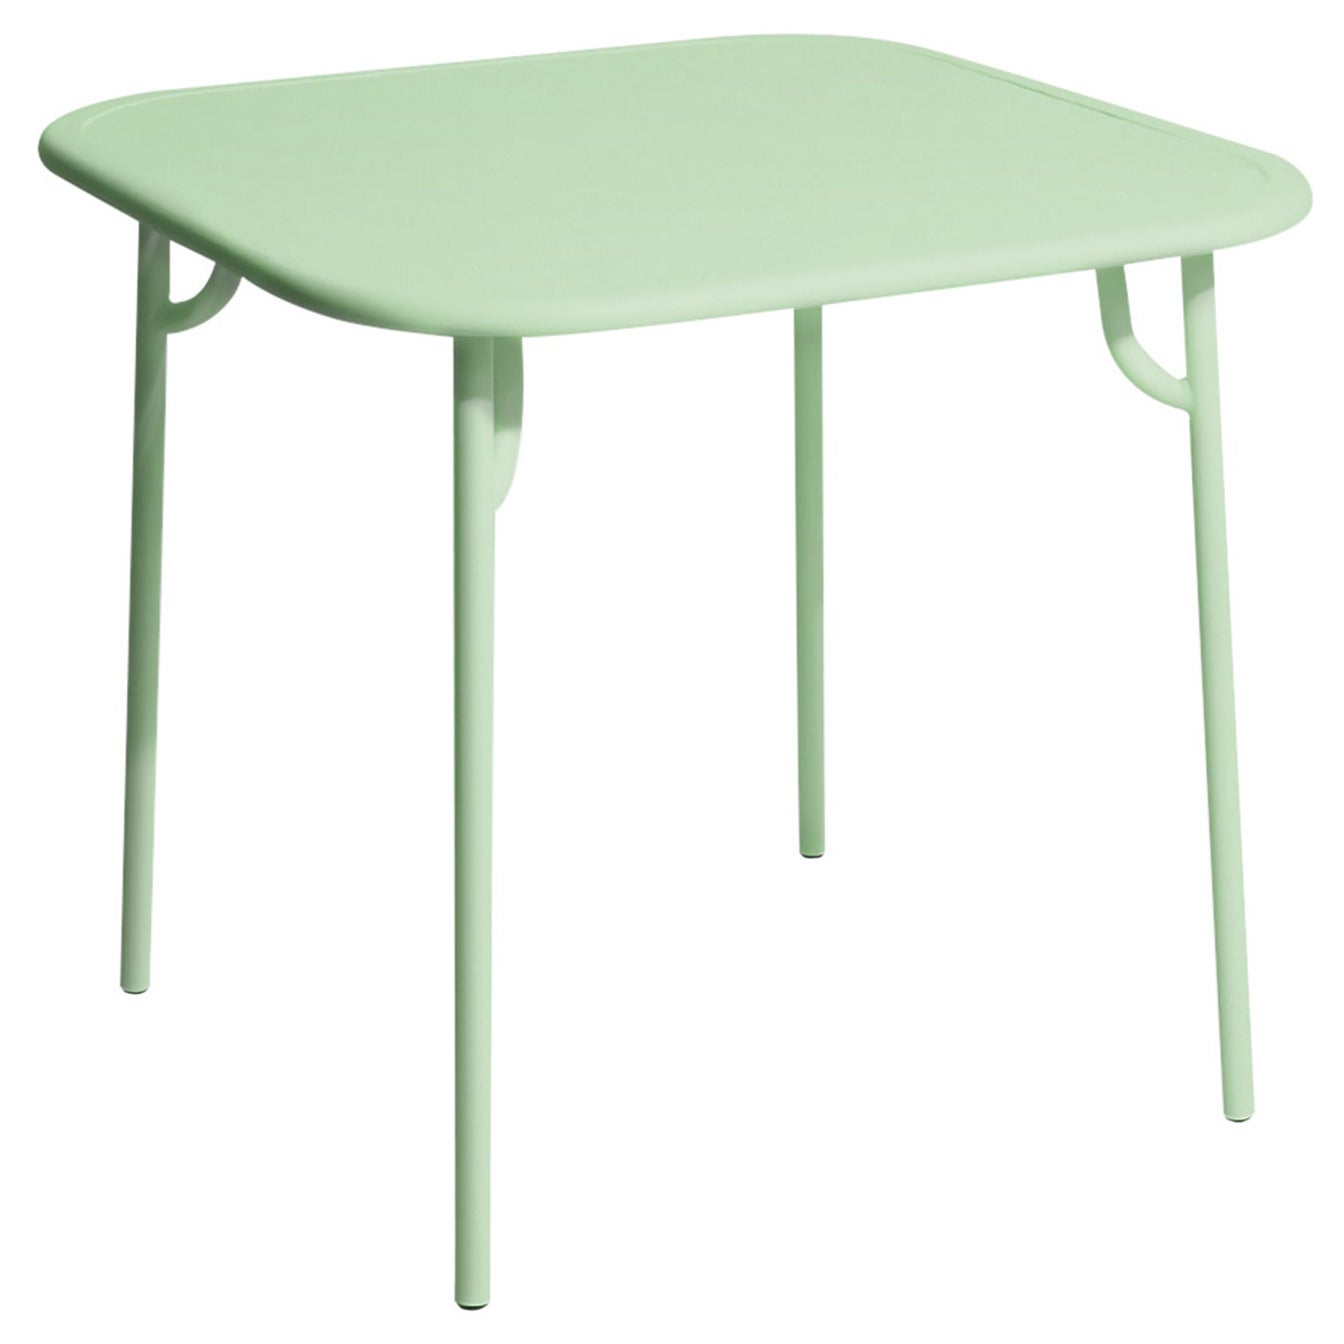 Petite Friture Week-End Plain Square Dining Table in Pastel Green Aluminium For Sale